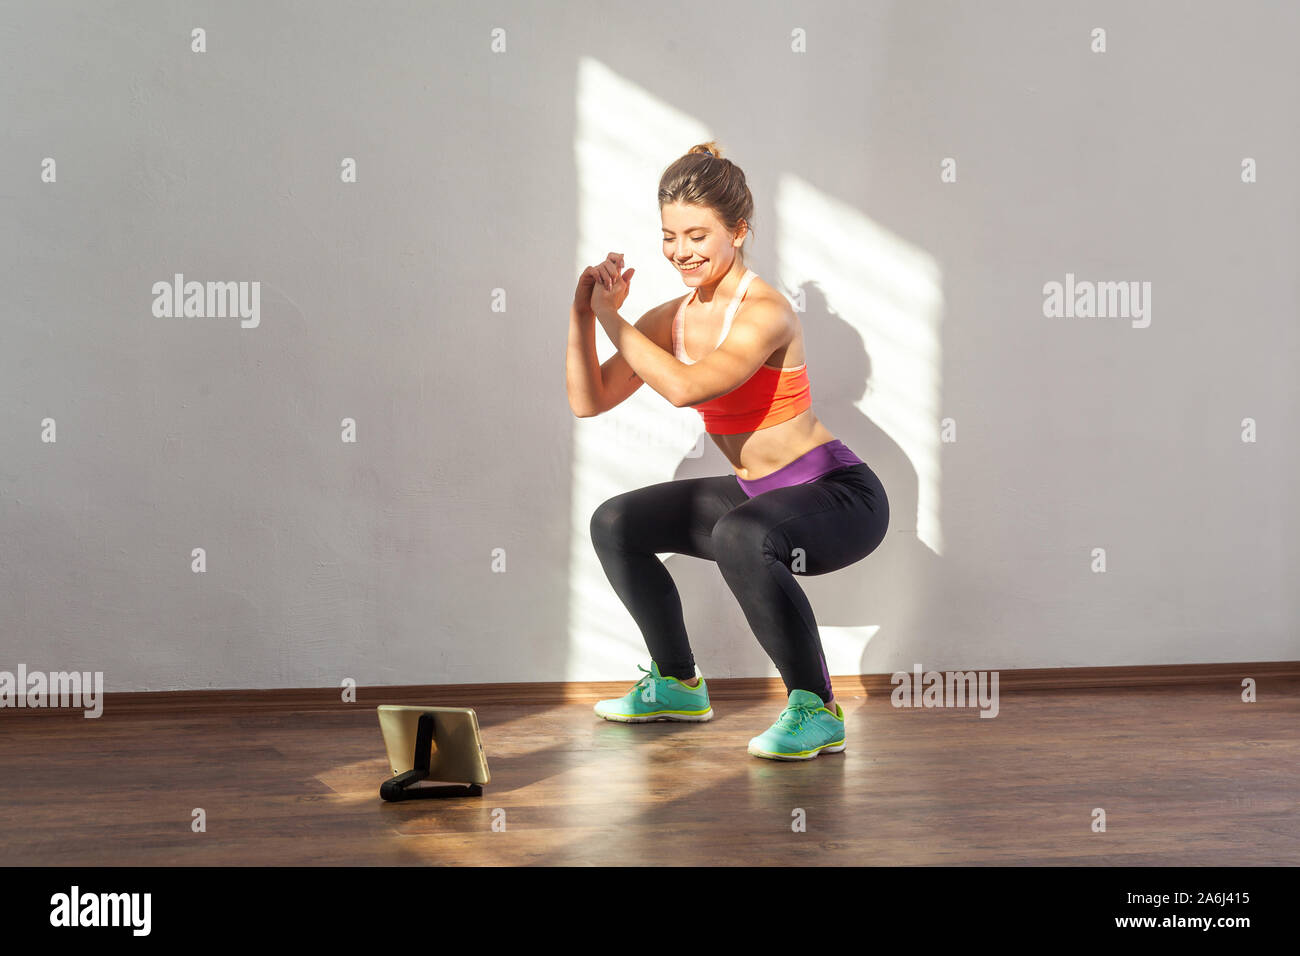 Positive sportive woman with bun hairstyle and in tight sportswear doing squatting sit-up exercise while watching training video on tablet. indoor stu Stock Photo